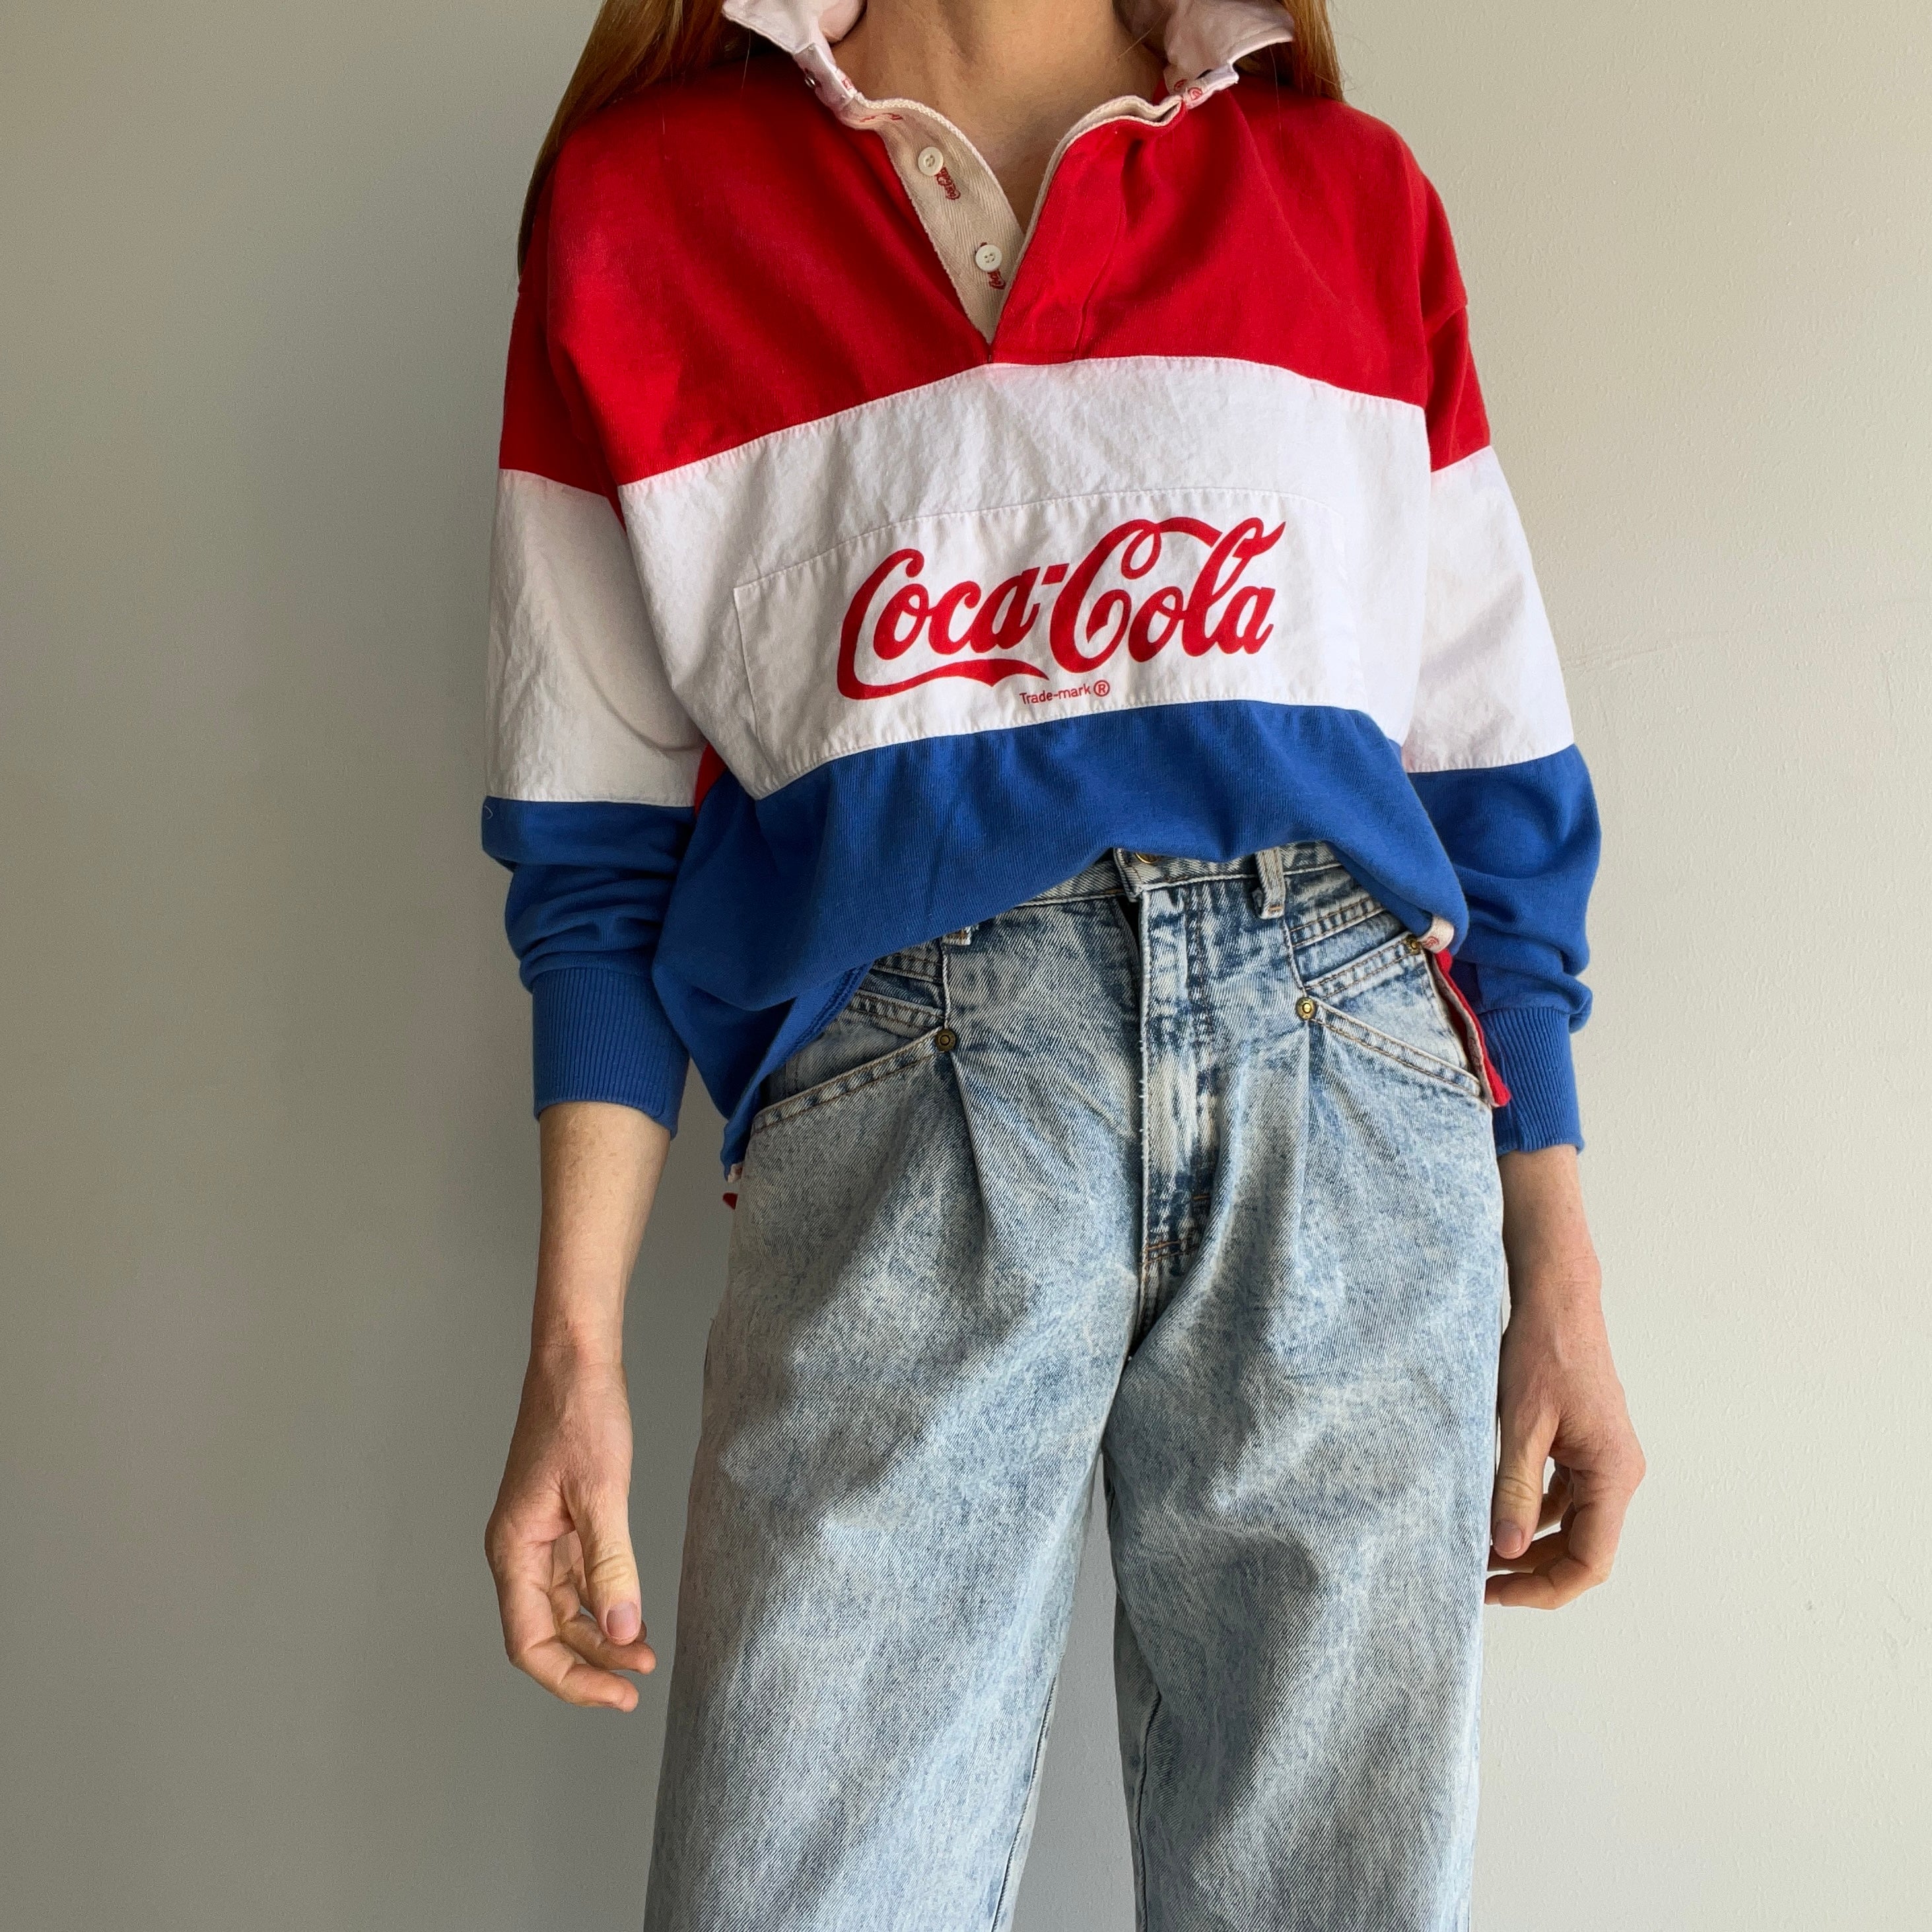 1990s Coke Color Block Rugby Style (Lighterweight) Shirt